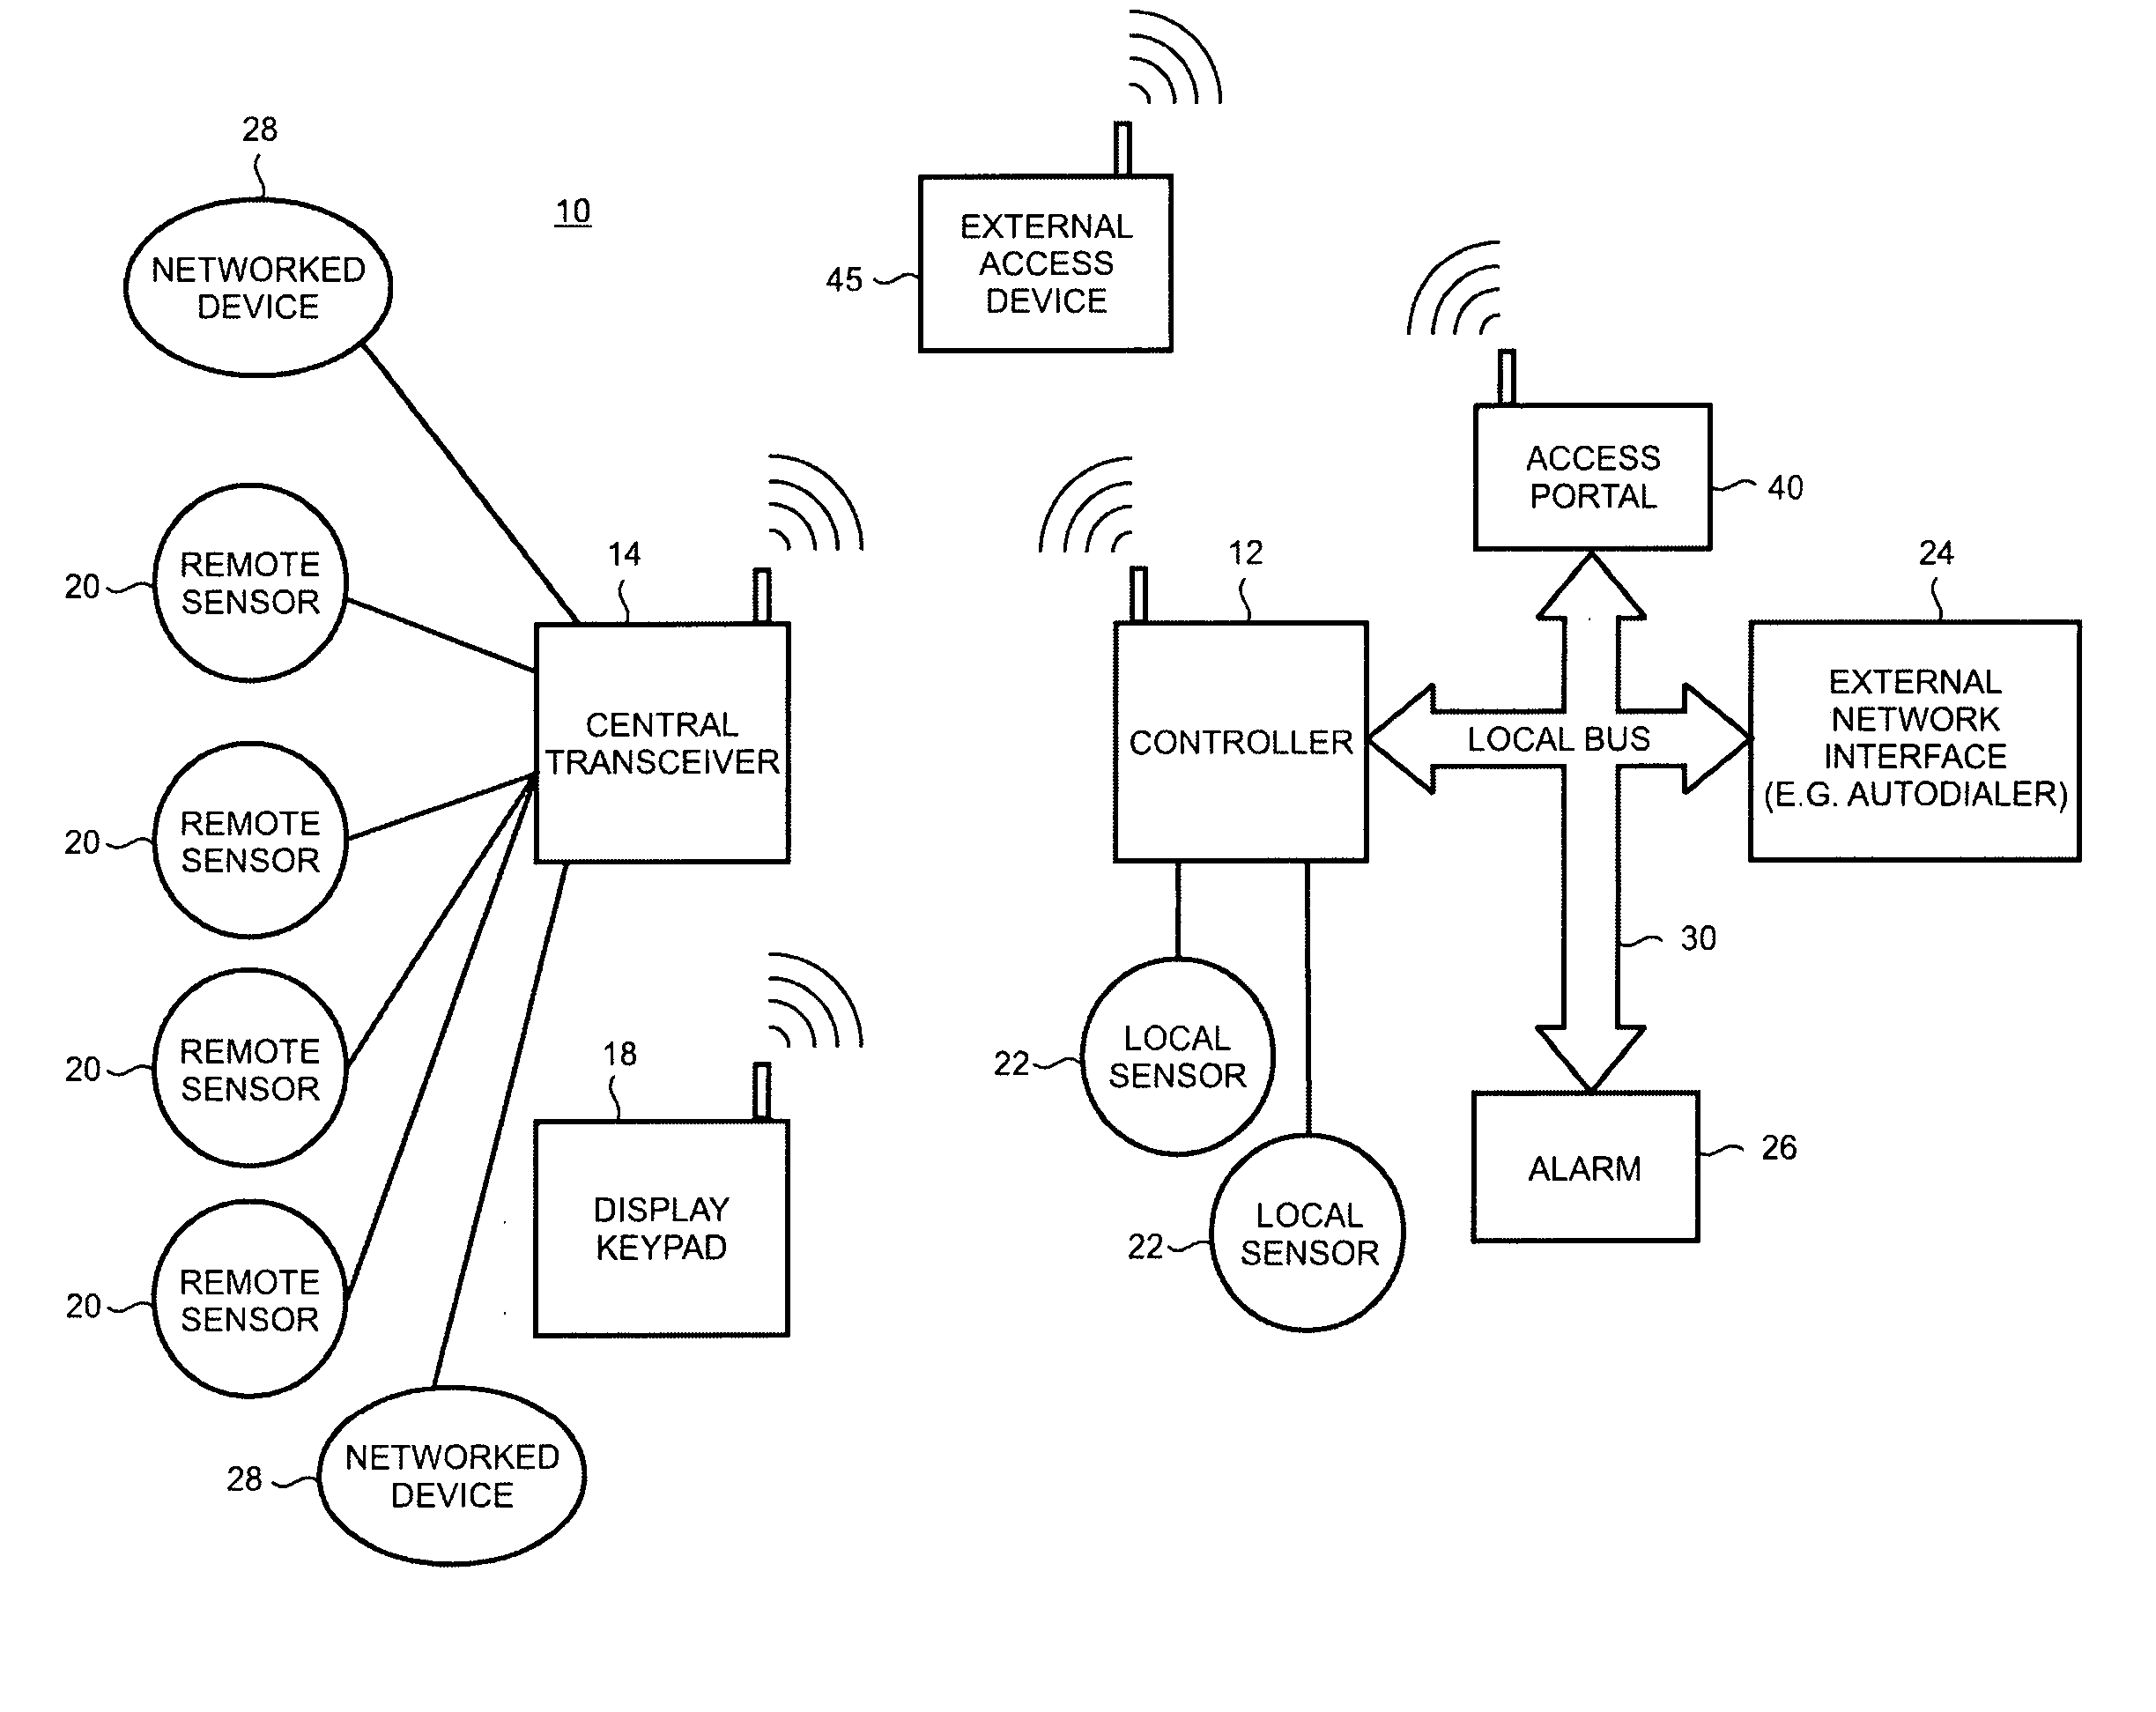 Method and apparatus for providing status information from a security and automation system to an emergency responder